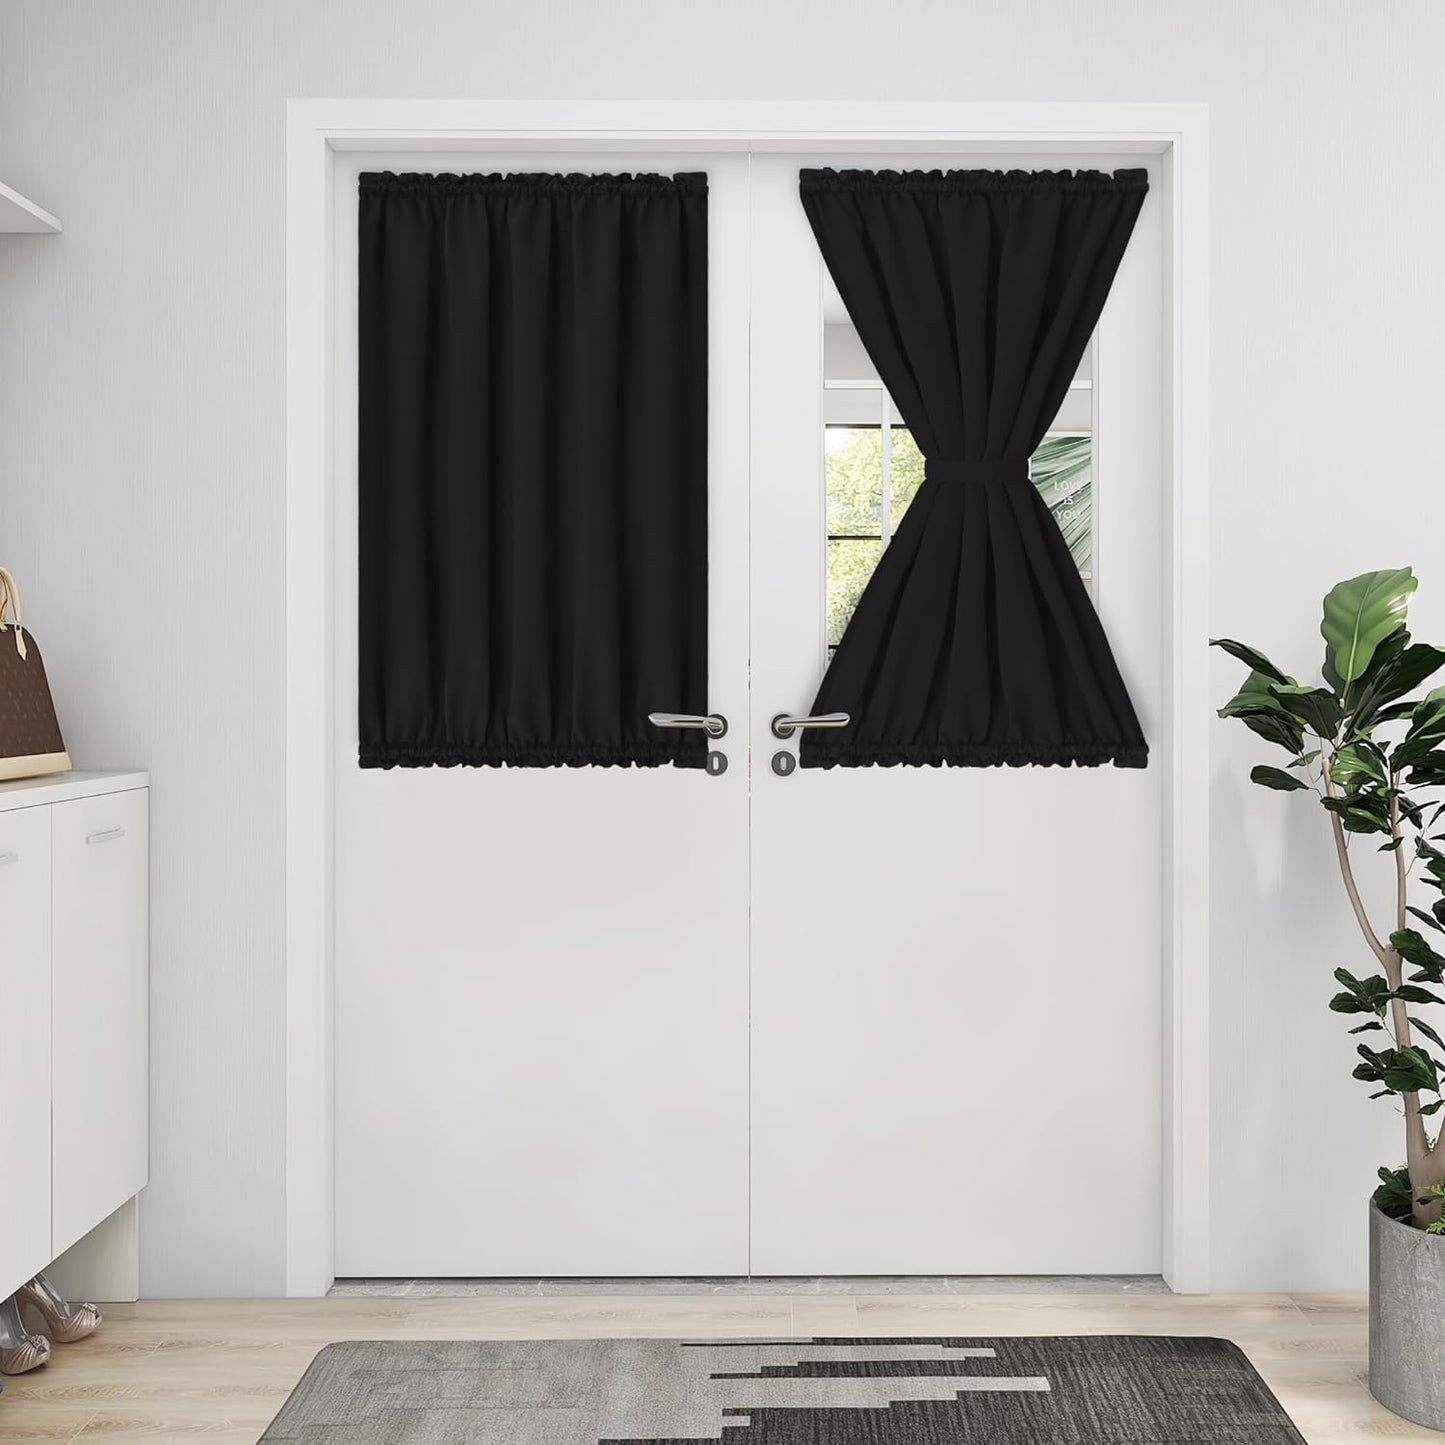 Easy-Going Blackout Door Curtains, Rod Pocket Privacy Light Filtering Sidelight Curtains French Door Curtains with Tieback, 1 Panel, 25X40 Inch, Gray  Easy-Going Black W25 X L40 Inch 